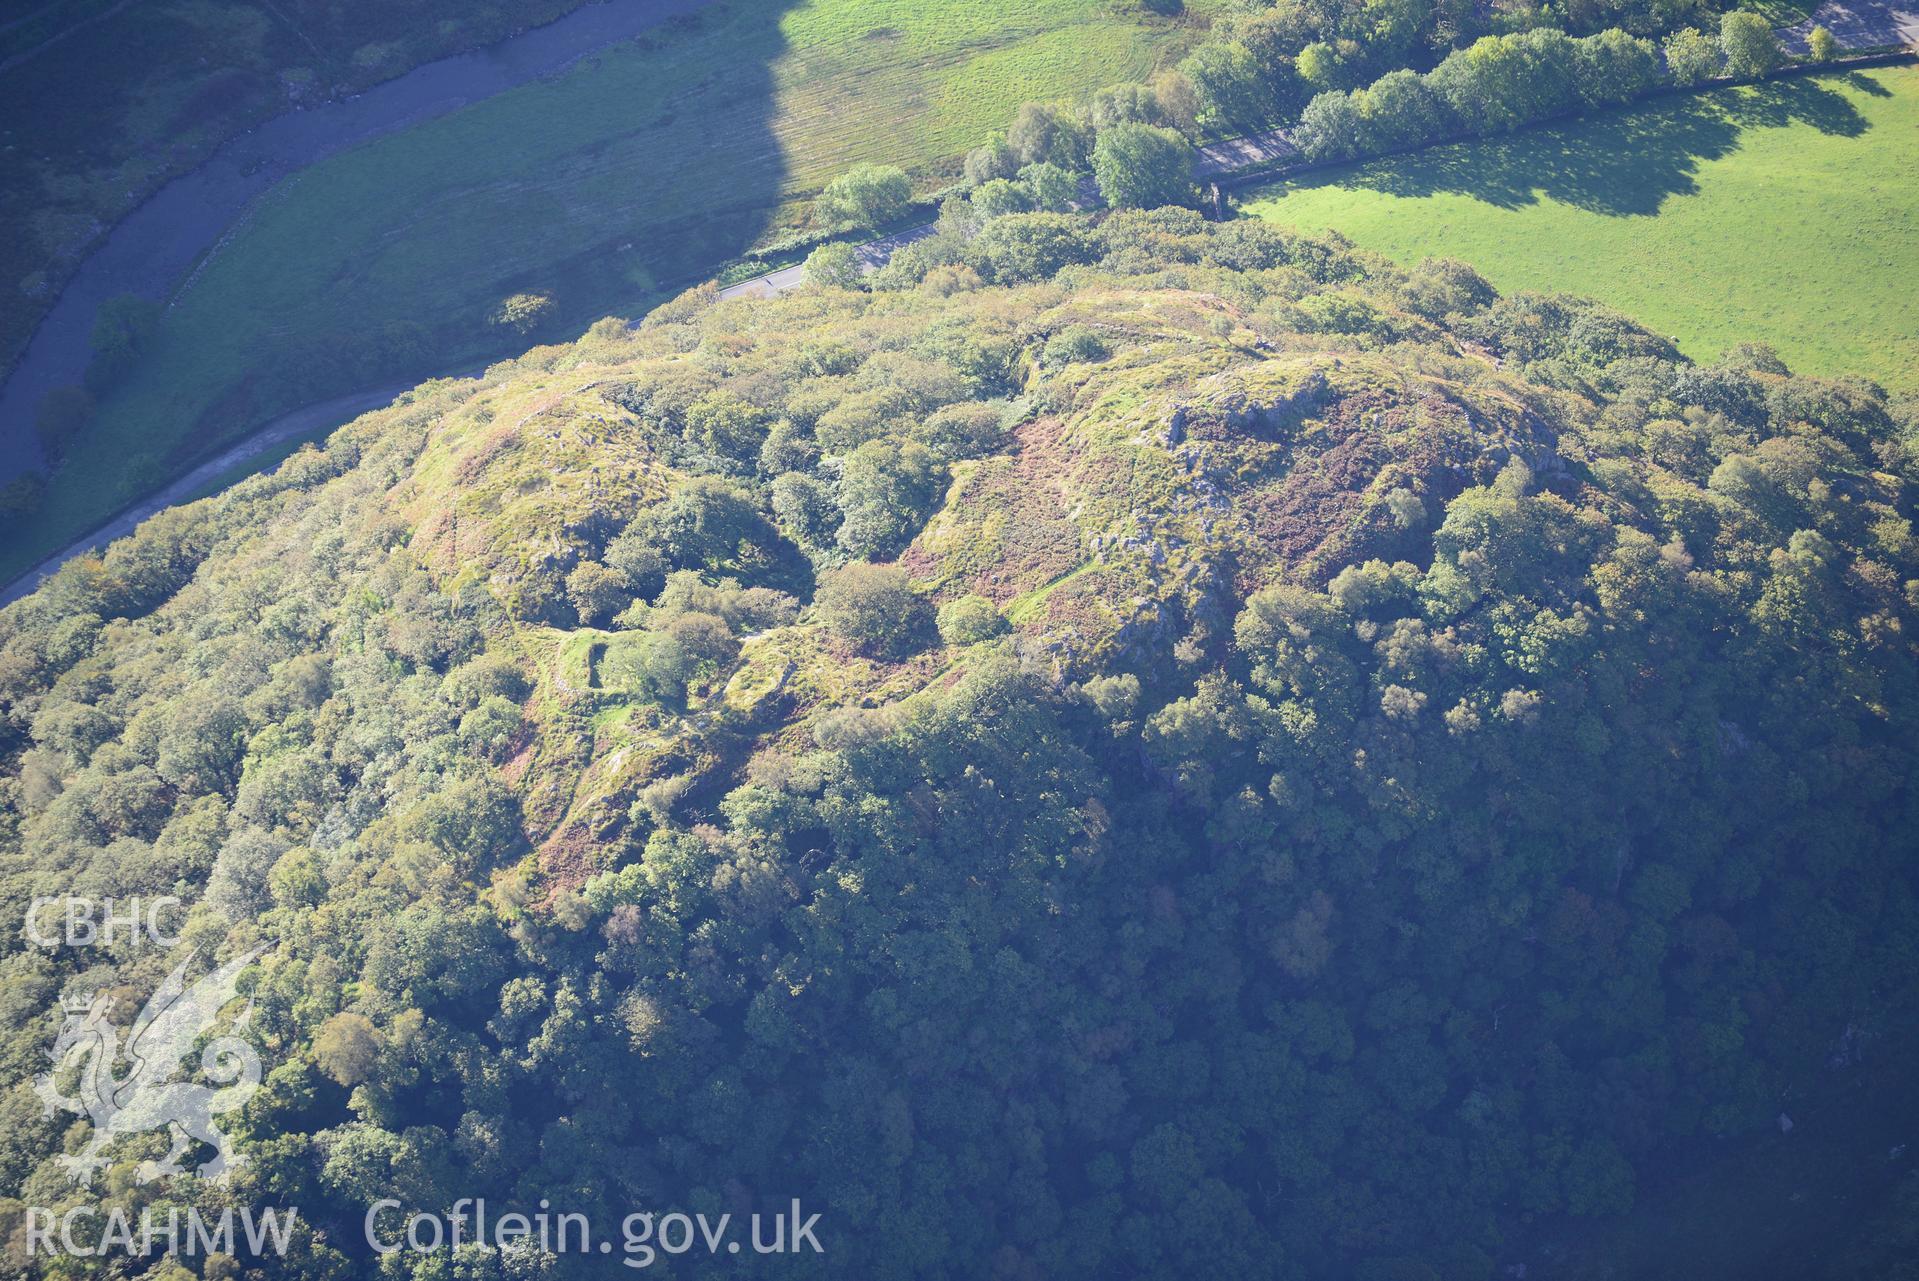 Dinas Emrys hillfort near Beddgelert. Oblique aerial photograph taken during the Royal Commission's programme of archaeological aerial reconnaissance by Toby Driver on 2nd October 2015.